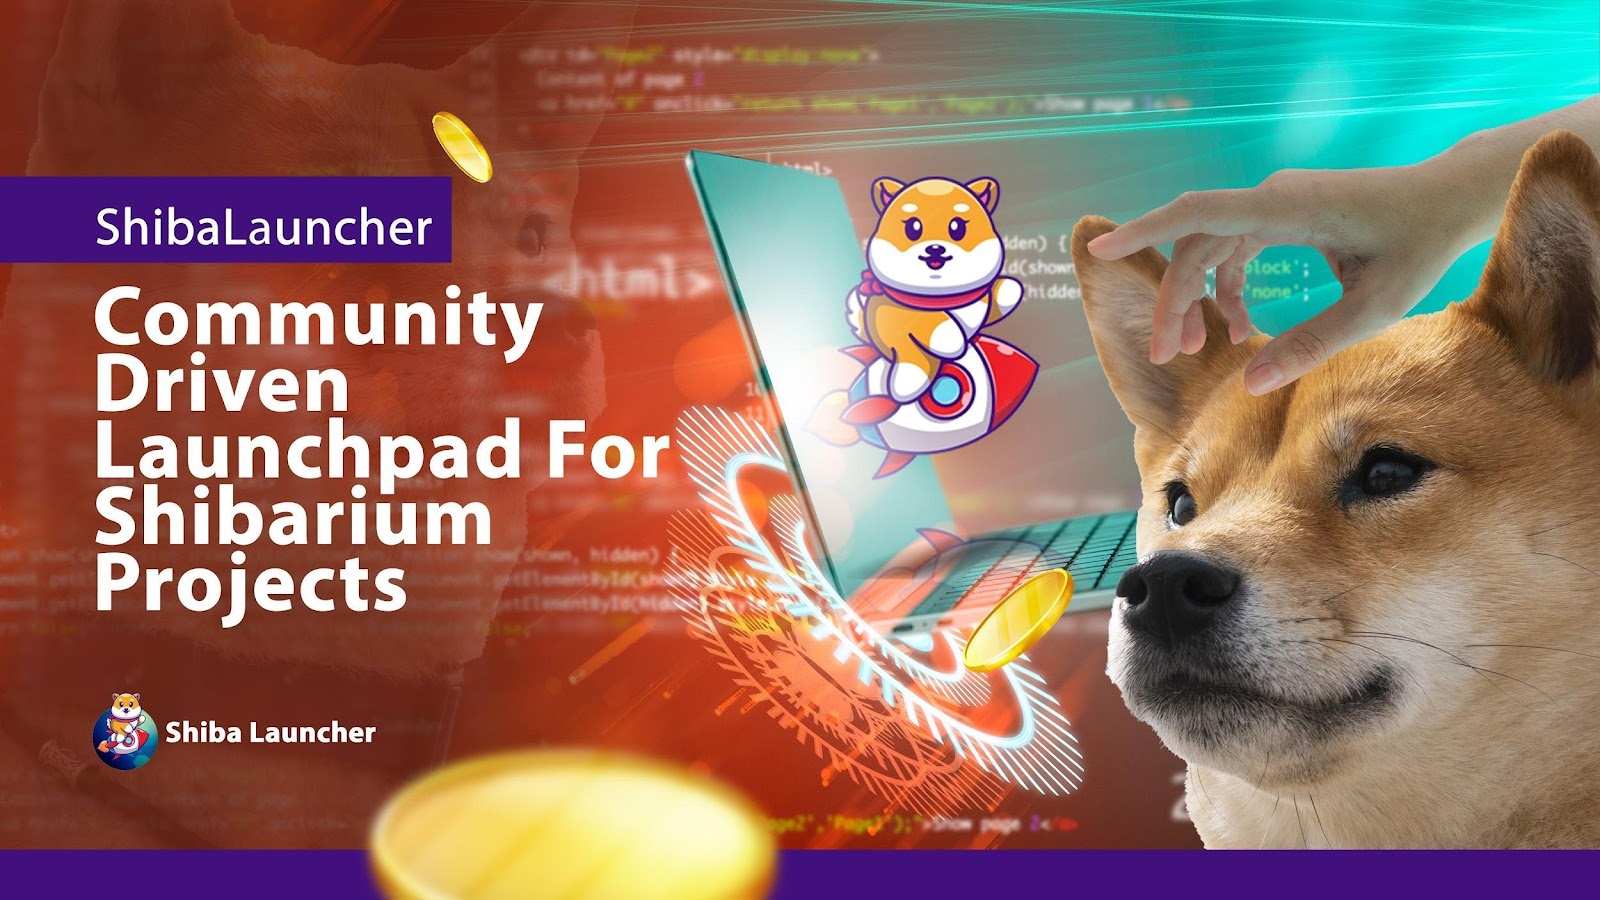 Shibalauncher - Shiba Inu Holders Excited To Receive The First Community Driven Launchpad on Shabrium